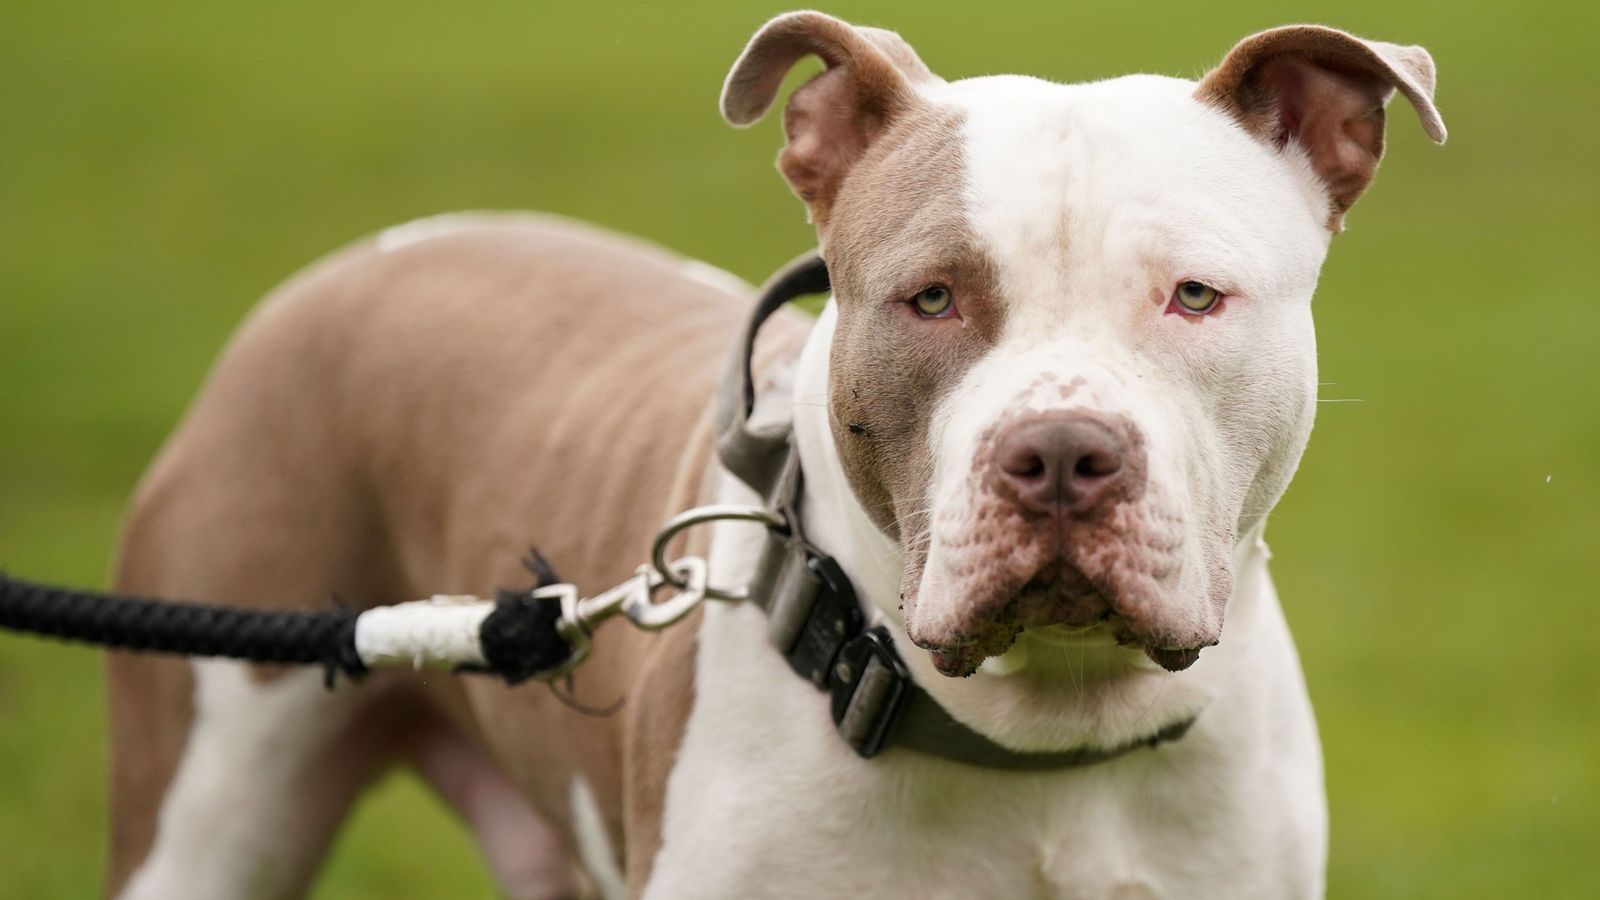 Unlicensed XL bully dogs to be banned in Scotland, Scottish government confirms